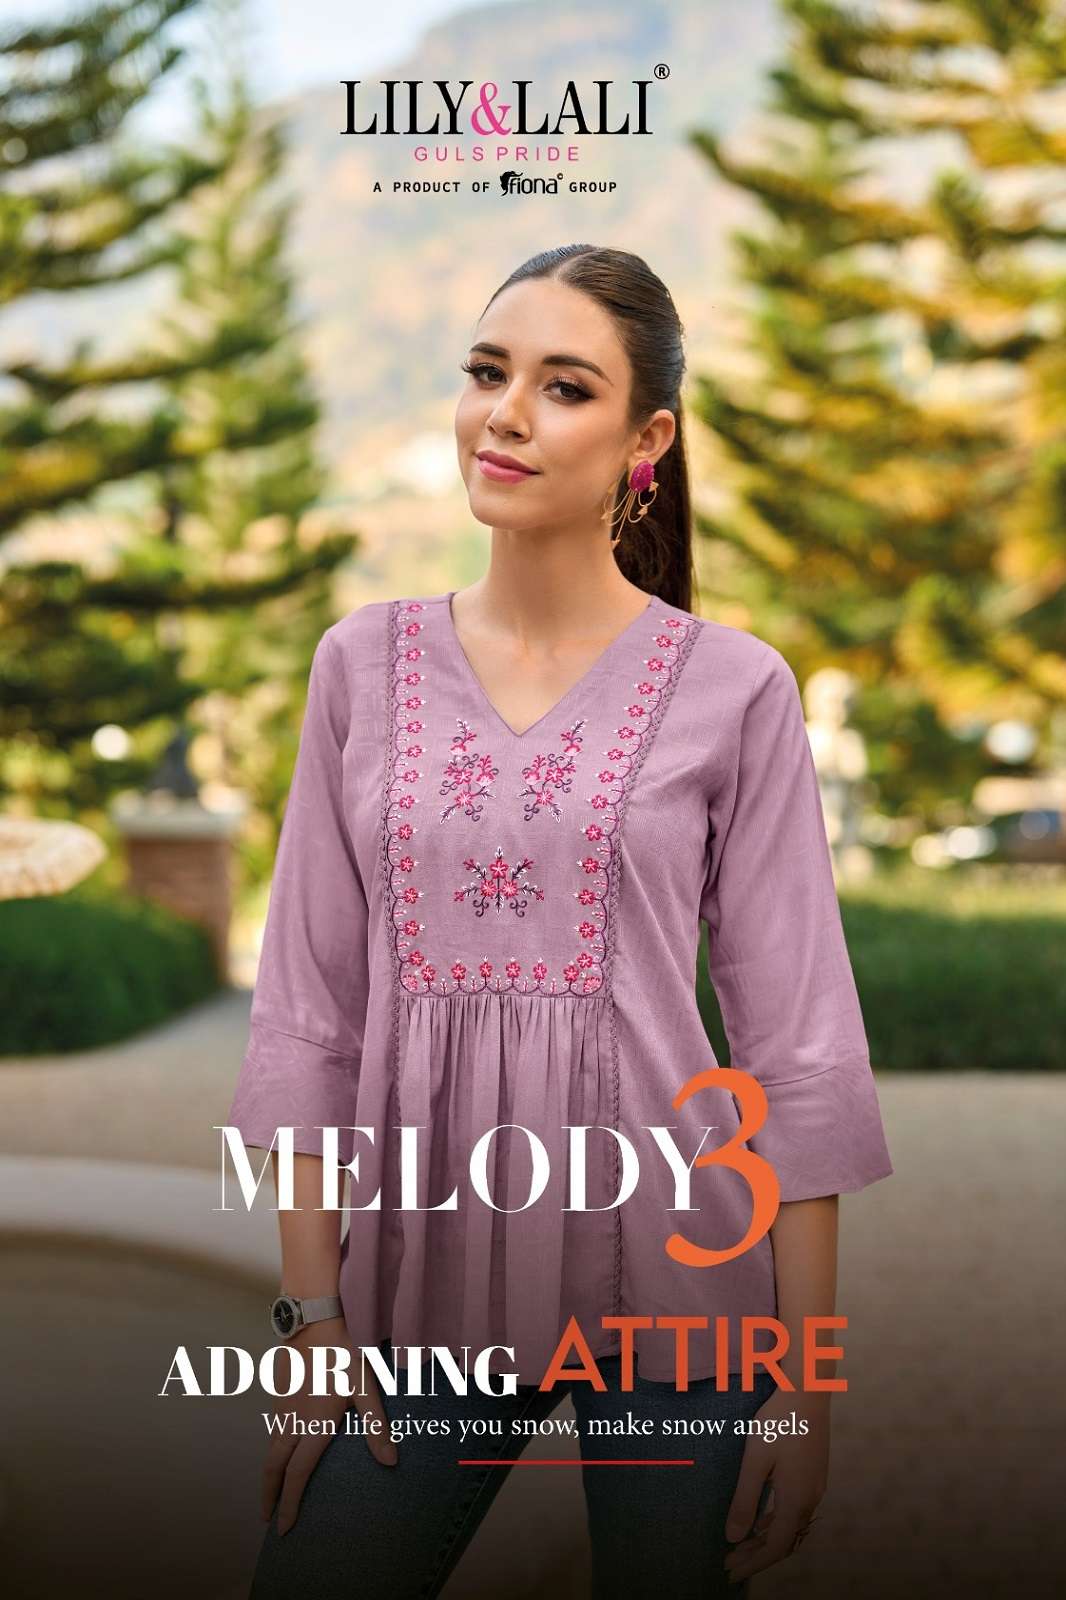 LILY LALI MELODY VOL 3 FANCY TOPS COLLECTION